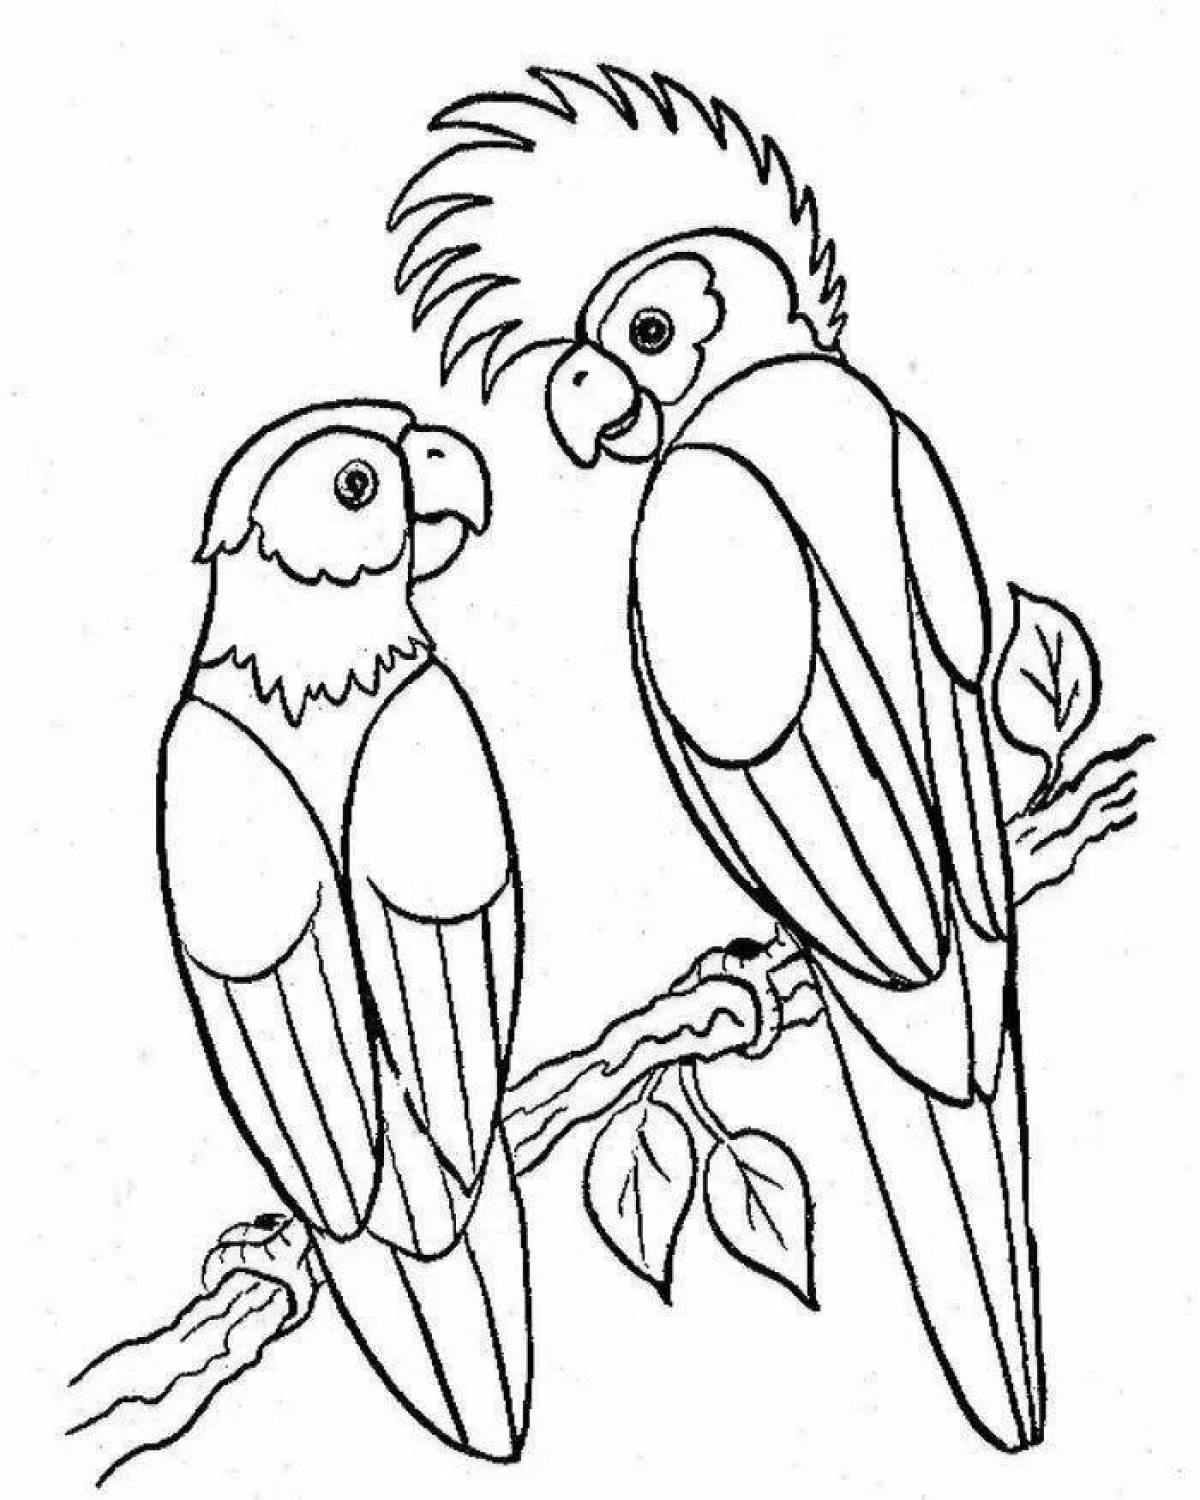 Adorable parrot coloring page